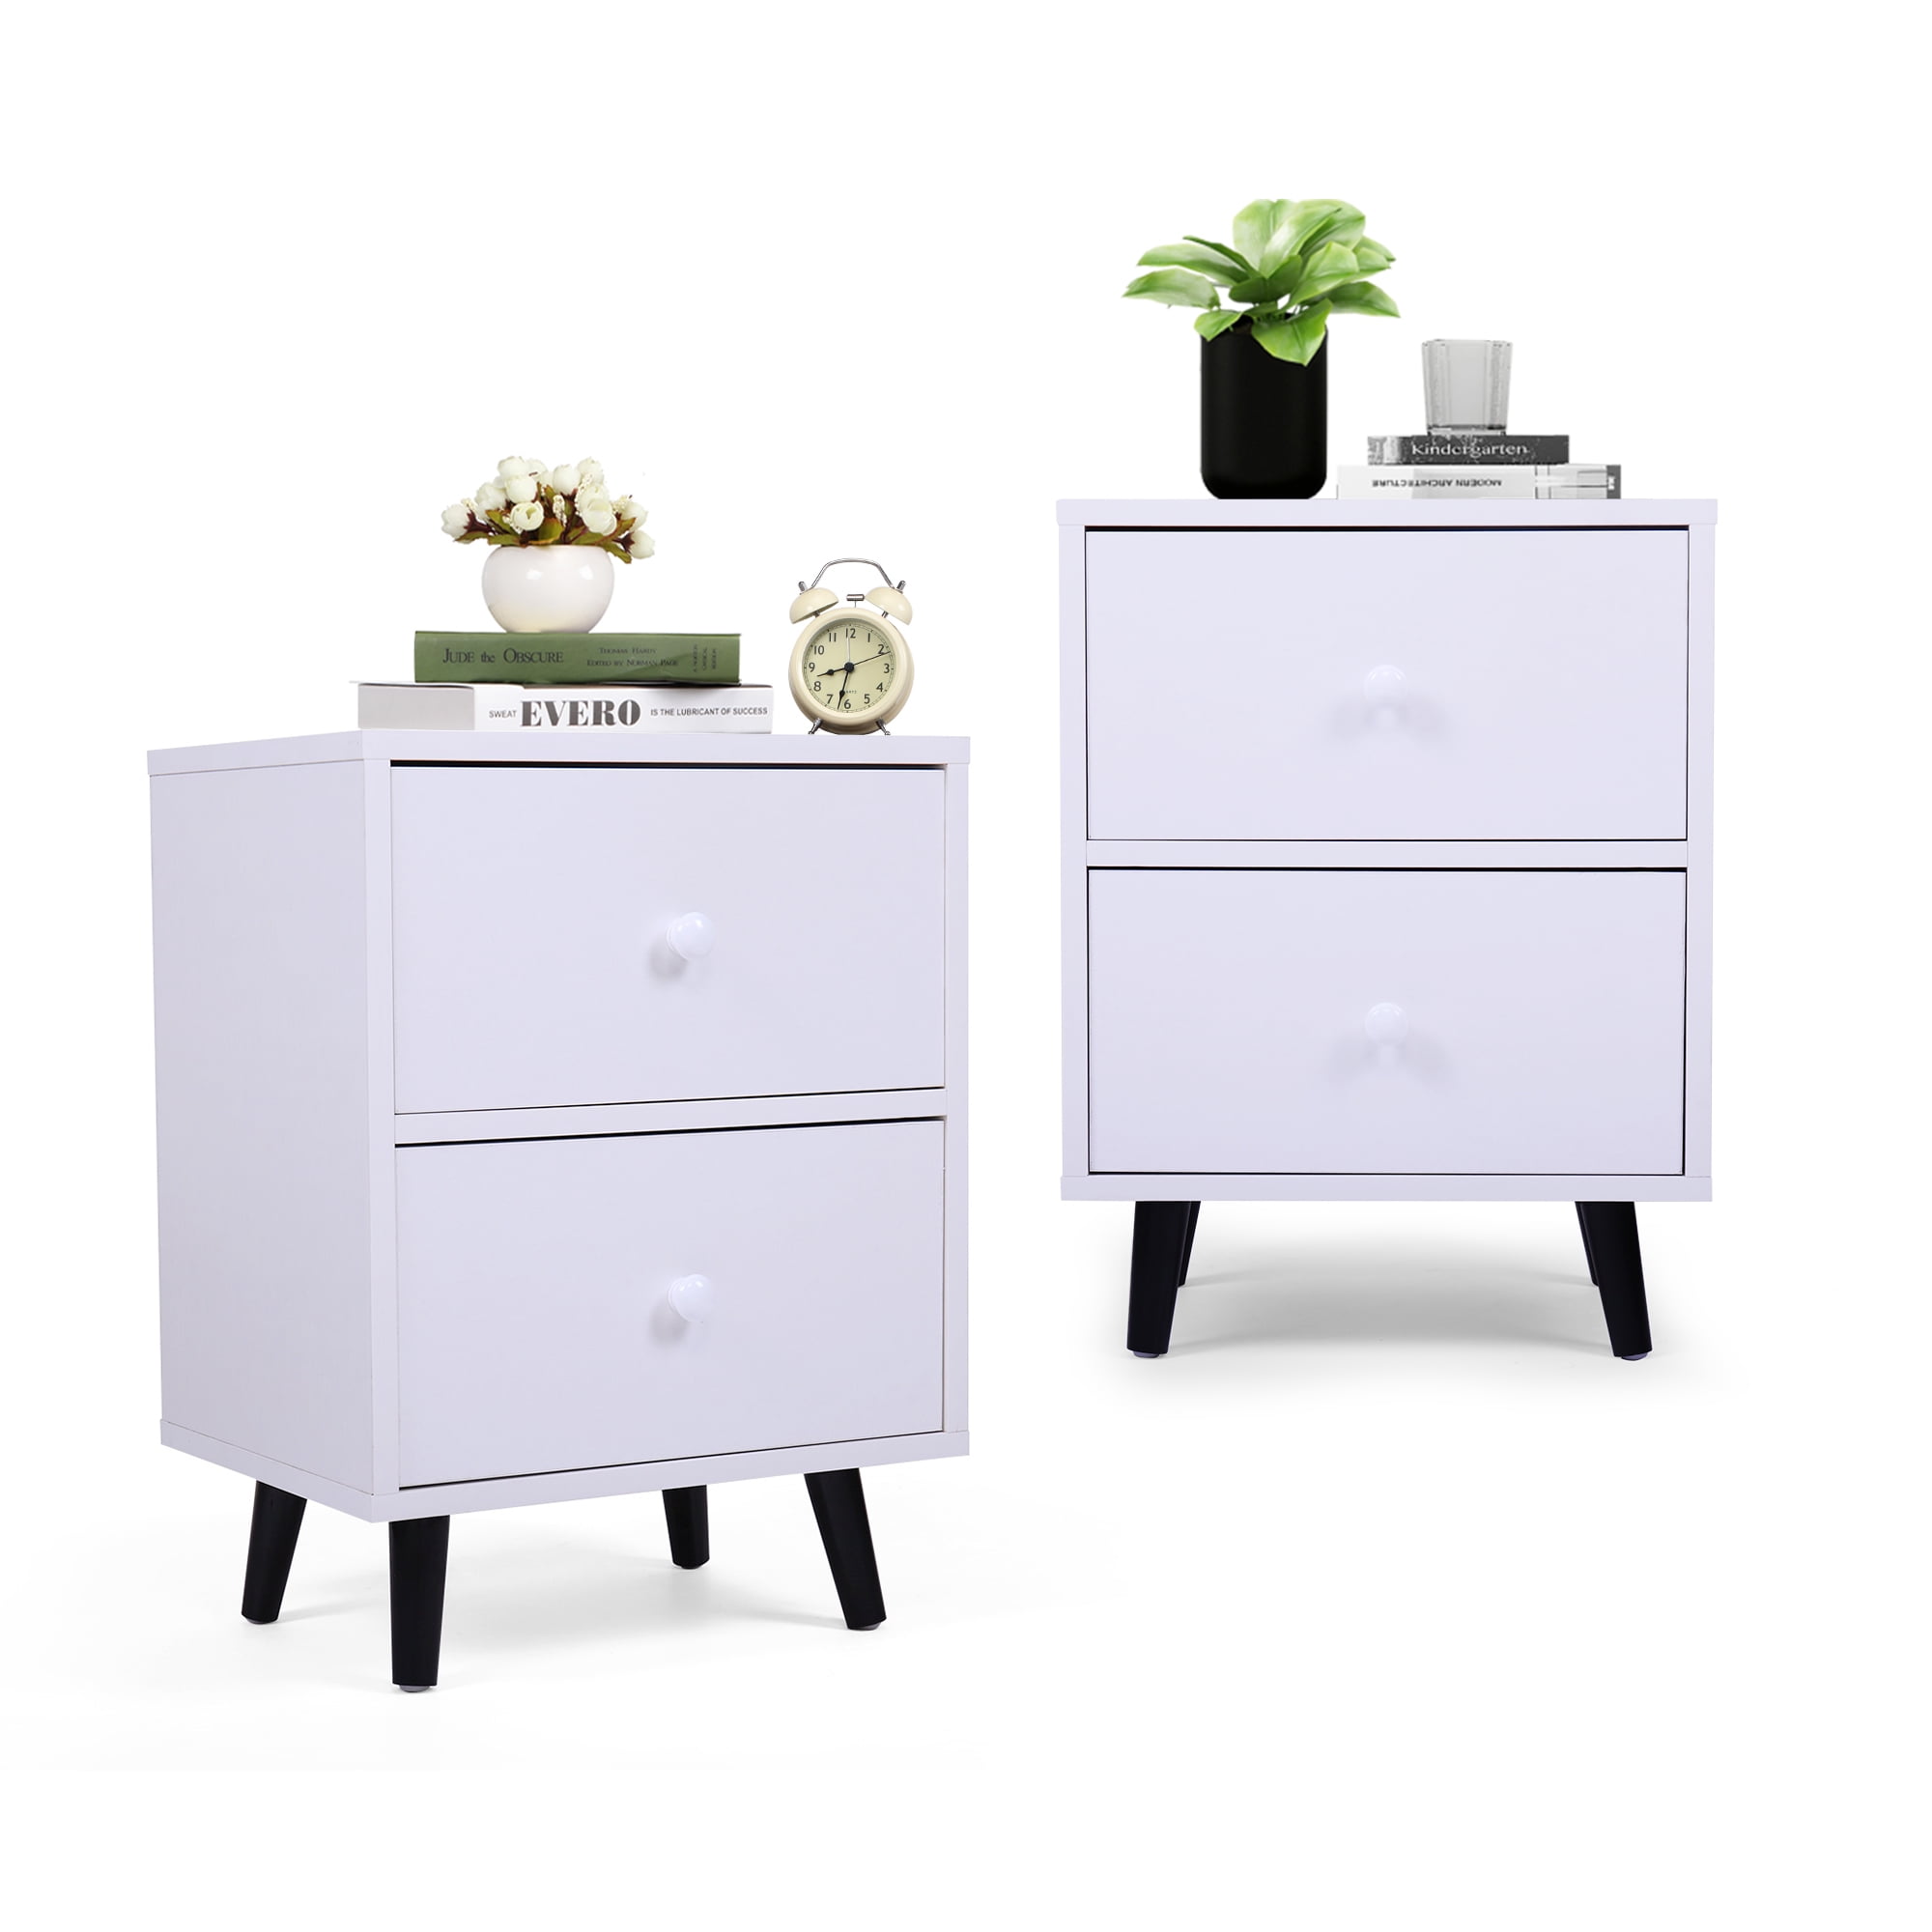 Jaxpety 2 PCS Nightstand End Beside Table 2 Drawer Storage Organizer Room Furniture，White